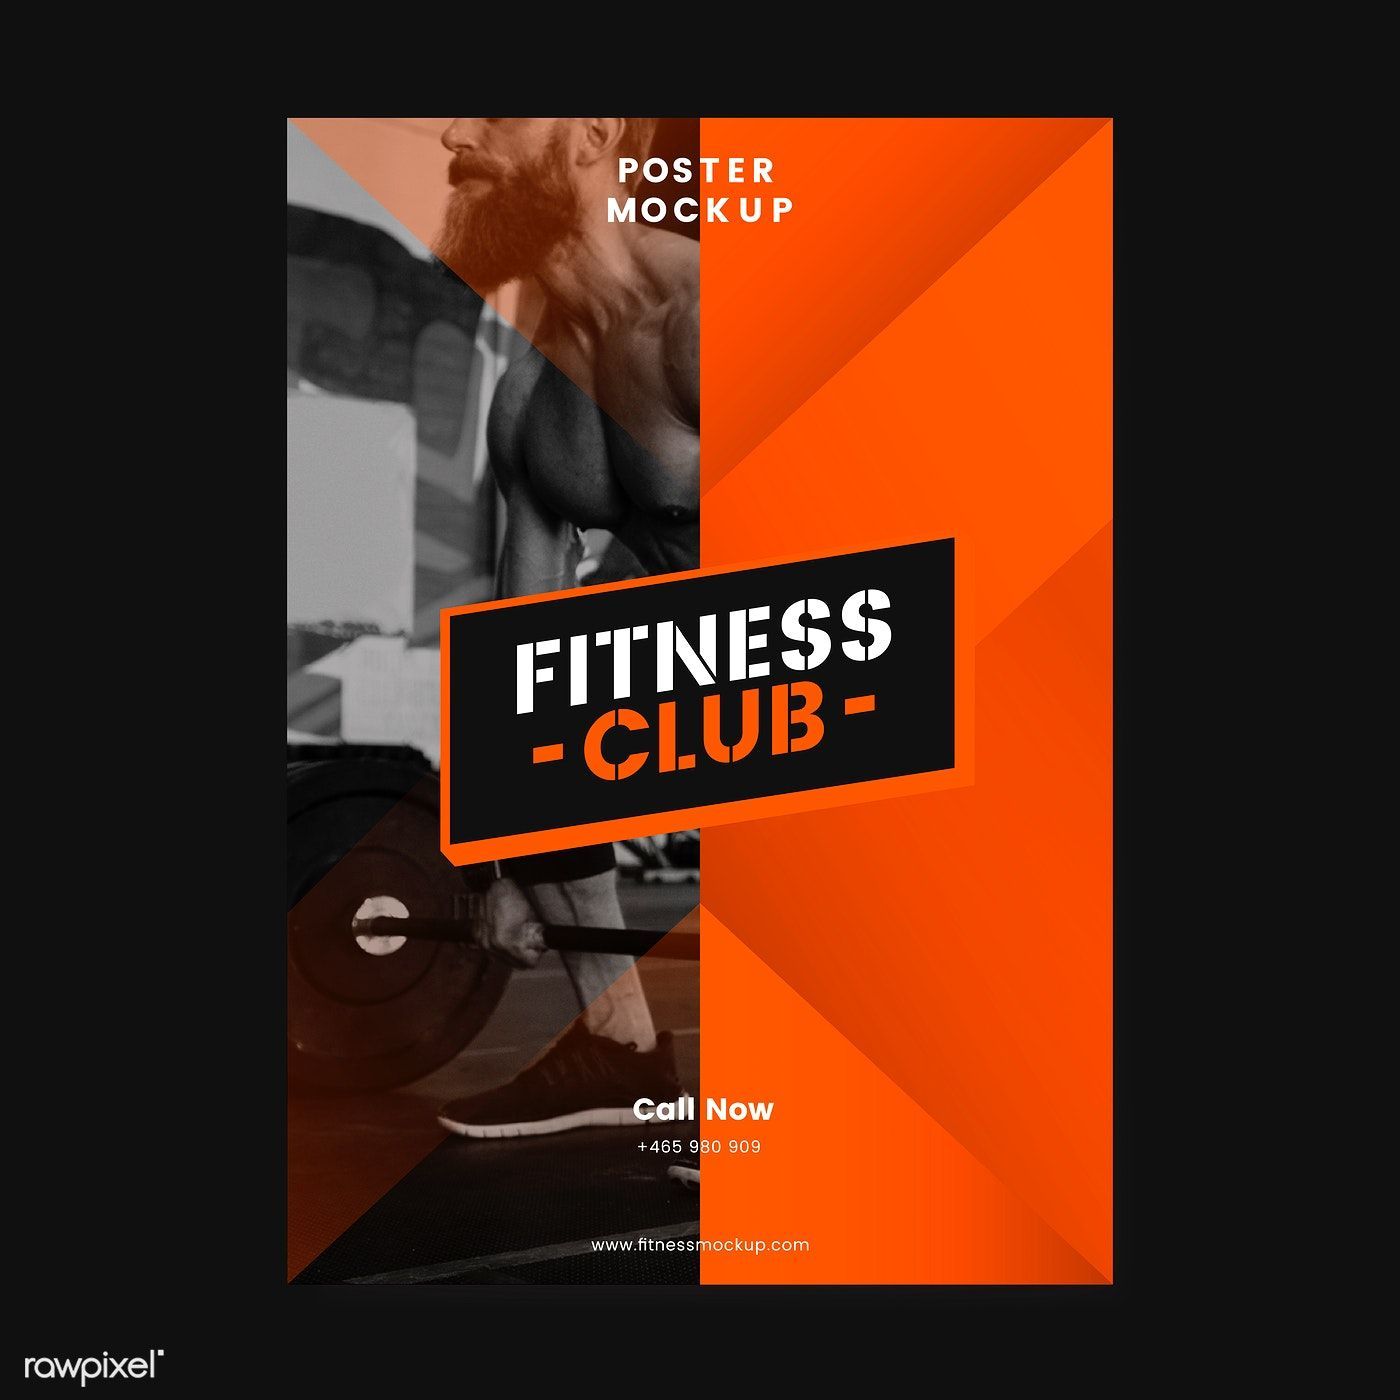 Download free vector of Fitness club promotional poster vector 533047 - Download free vector of Fitness club promotional poster vector 533047 -   10 fitness Poster vector ideas